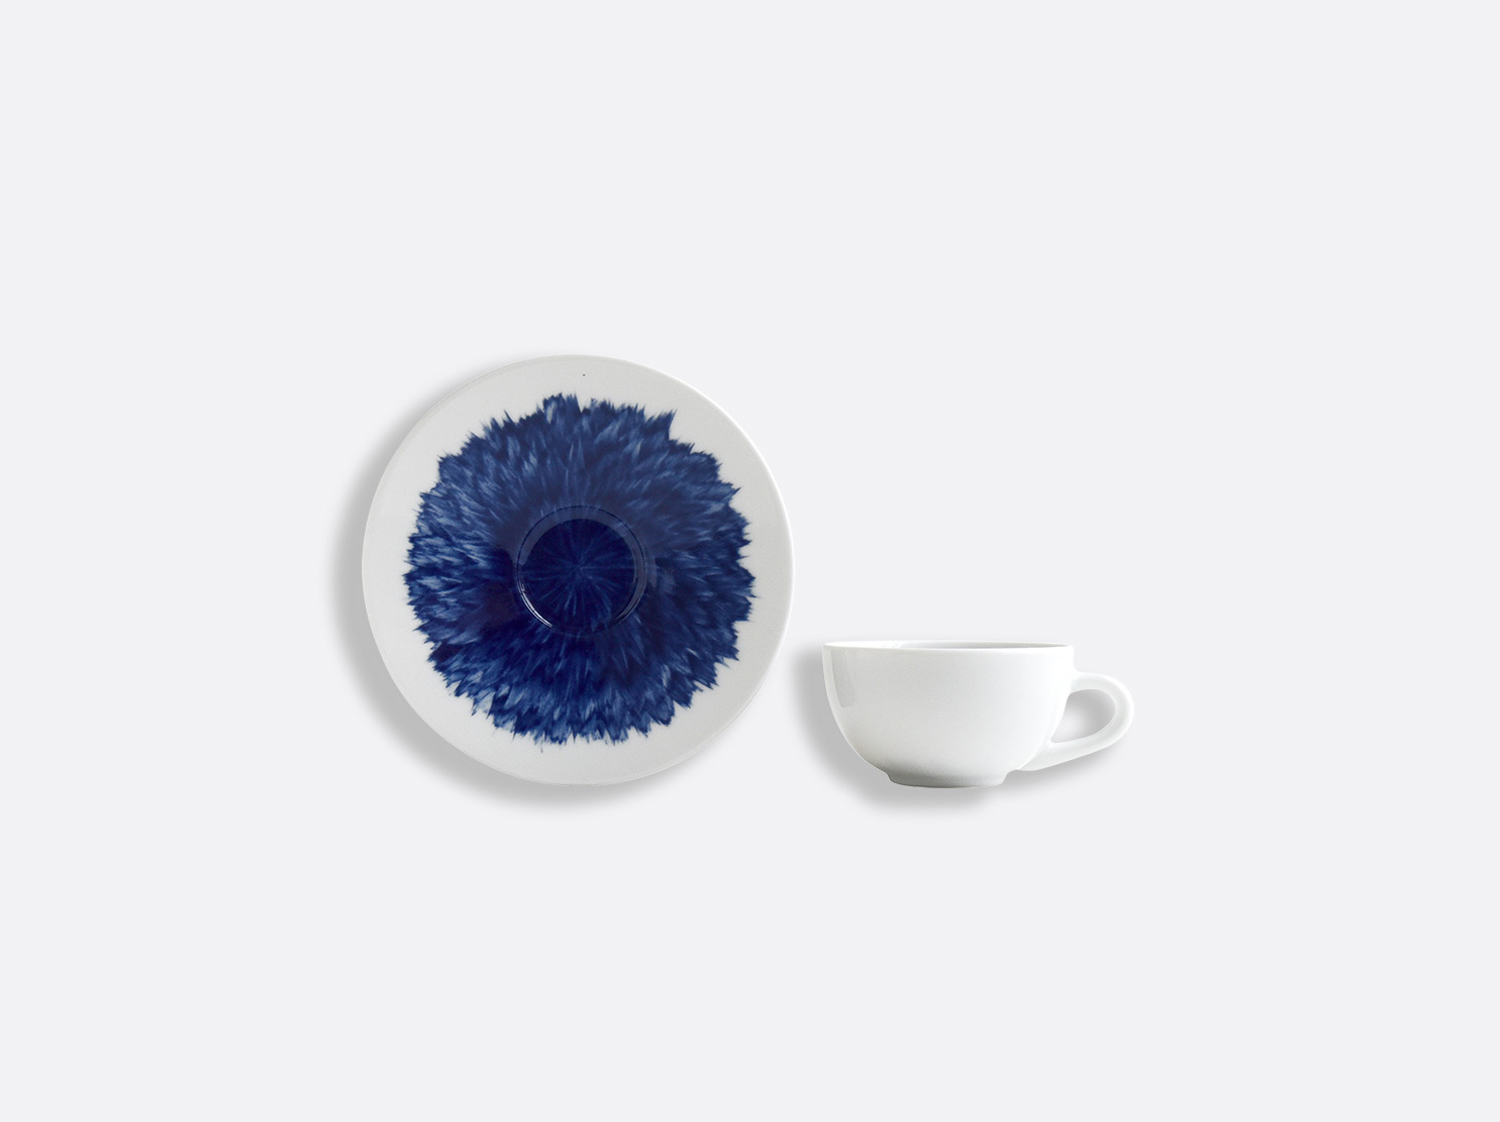 China Espresso cup and saucer 3 oz of the collection IN BLOOM - Zemer Peled | Bernardaud